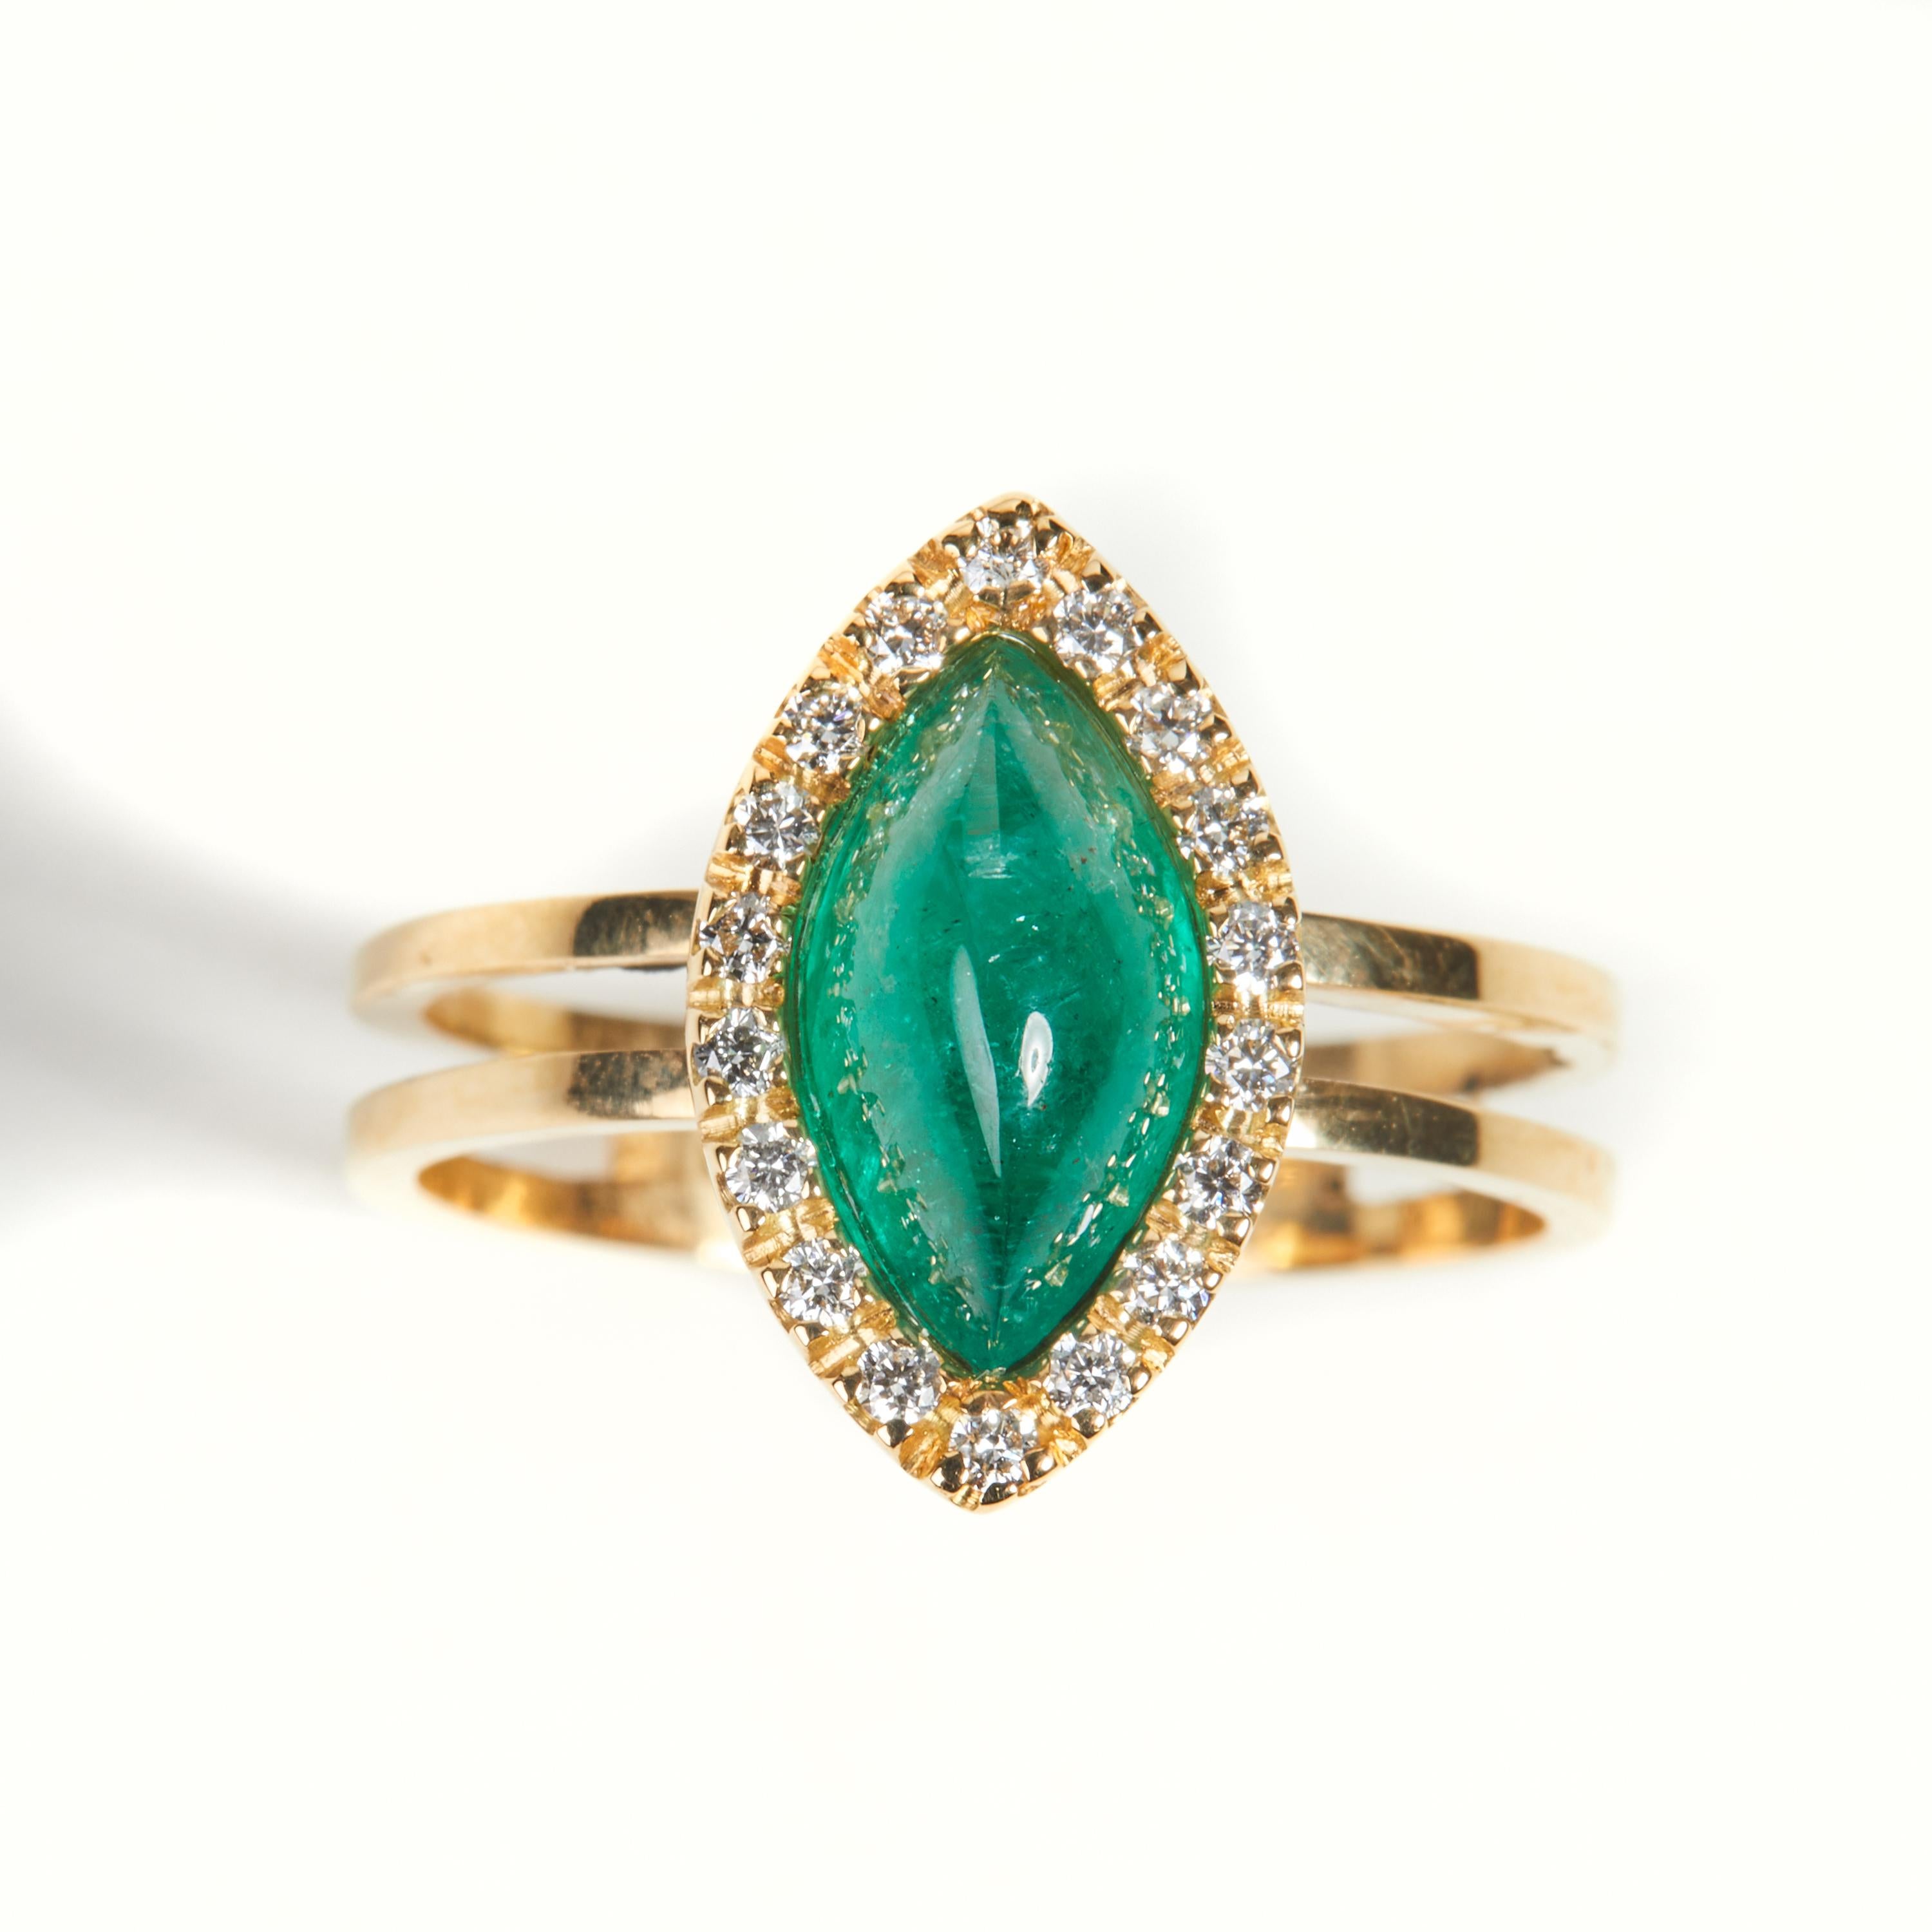 18 Karat Yelow Gold Diamond and Peridot Ring

18 Diamonds 0.16 Carat
1 Emerald 1.32 carat



Size EU 54 US 6.8


Founded in 1974, Gianni Lazzaro is a family-owned jewelery company based out of Düsseldorf, Germany.
Although rooted in Germany, Gianni